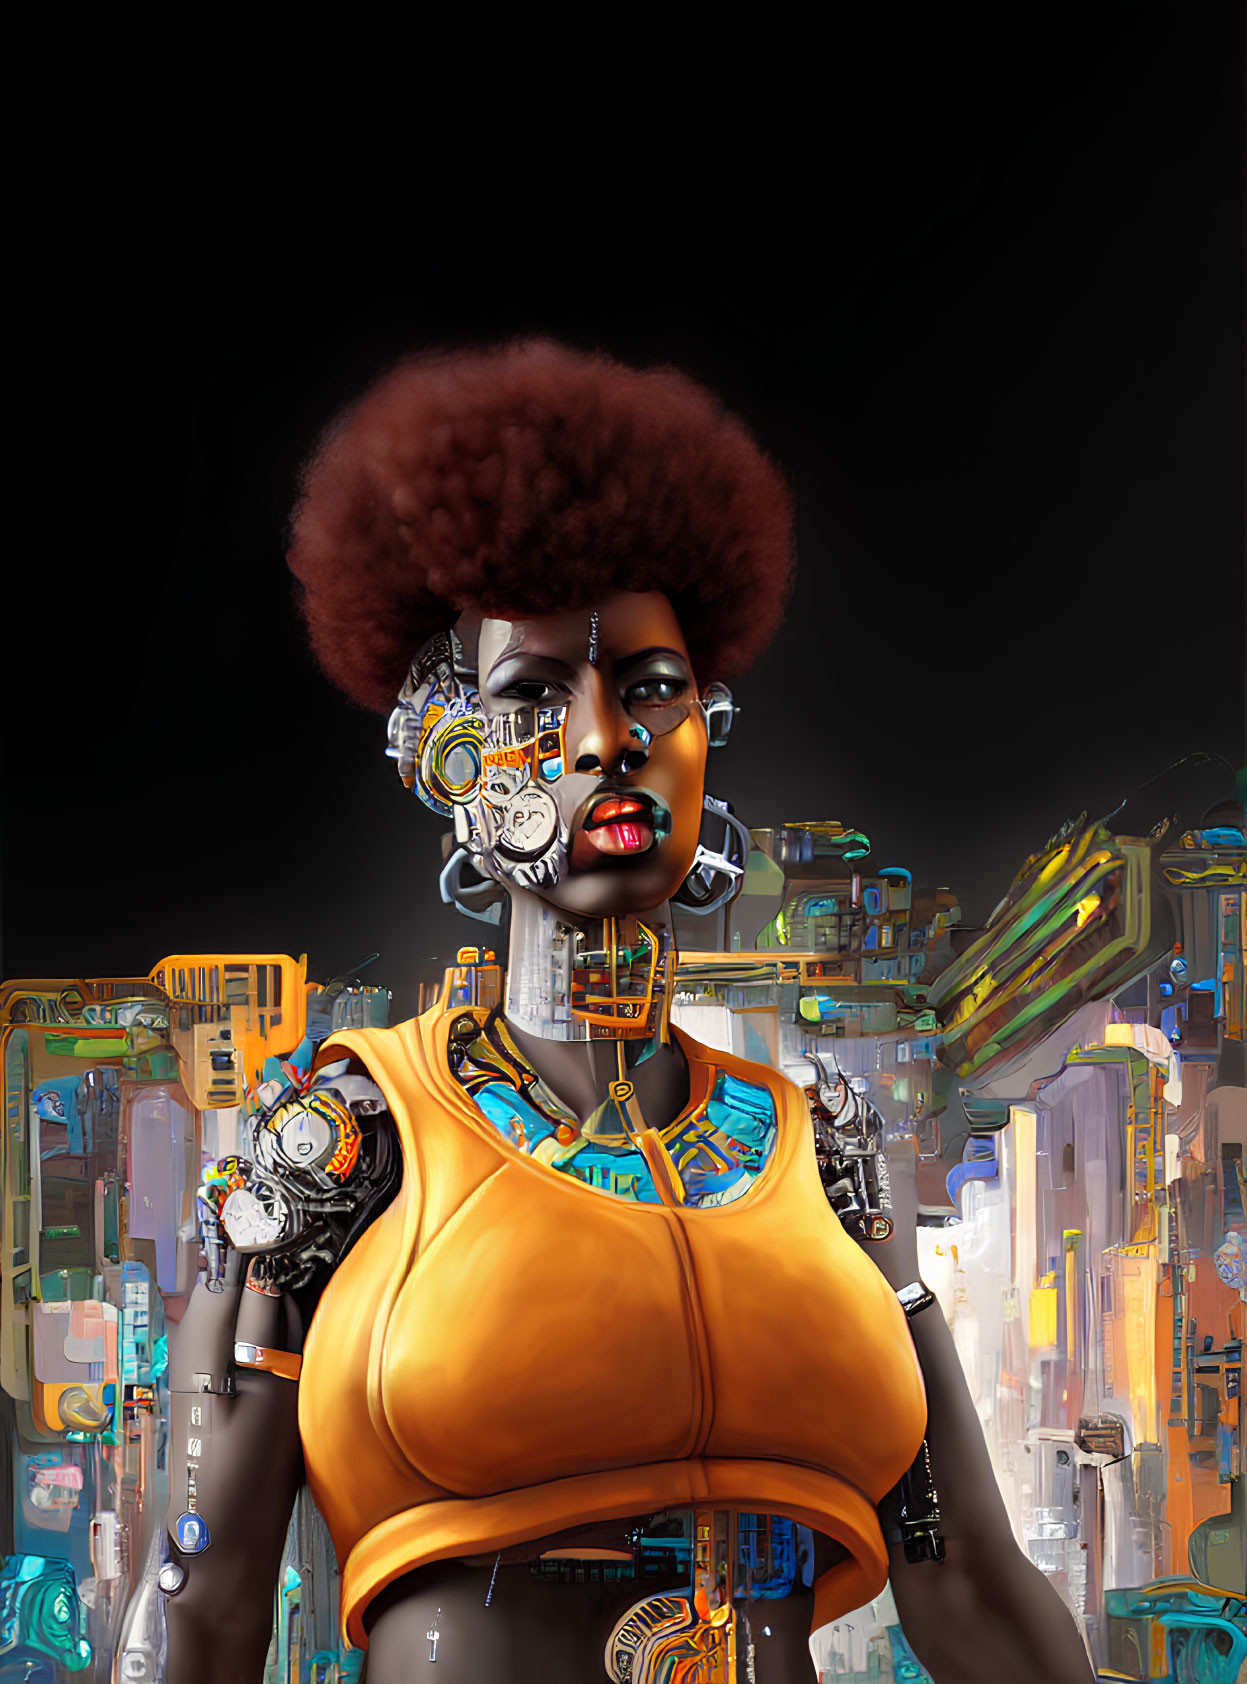 Cybernetic woman with afro hairstyle in futuristic cityscape